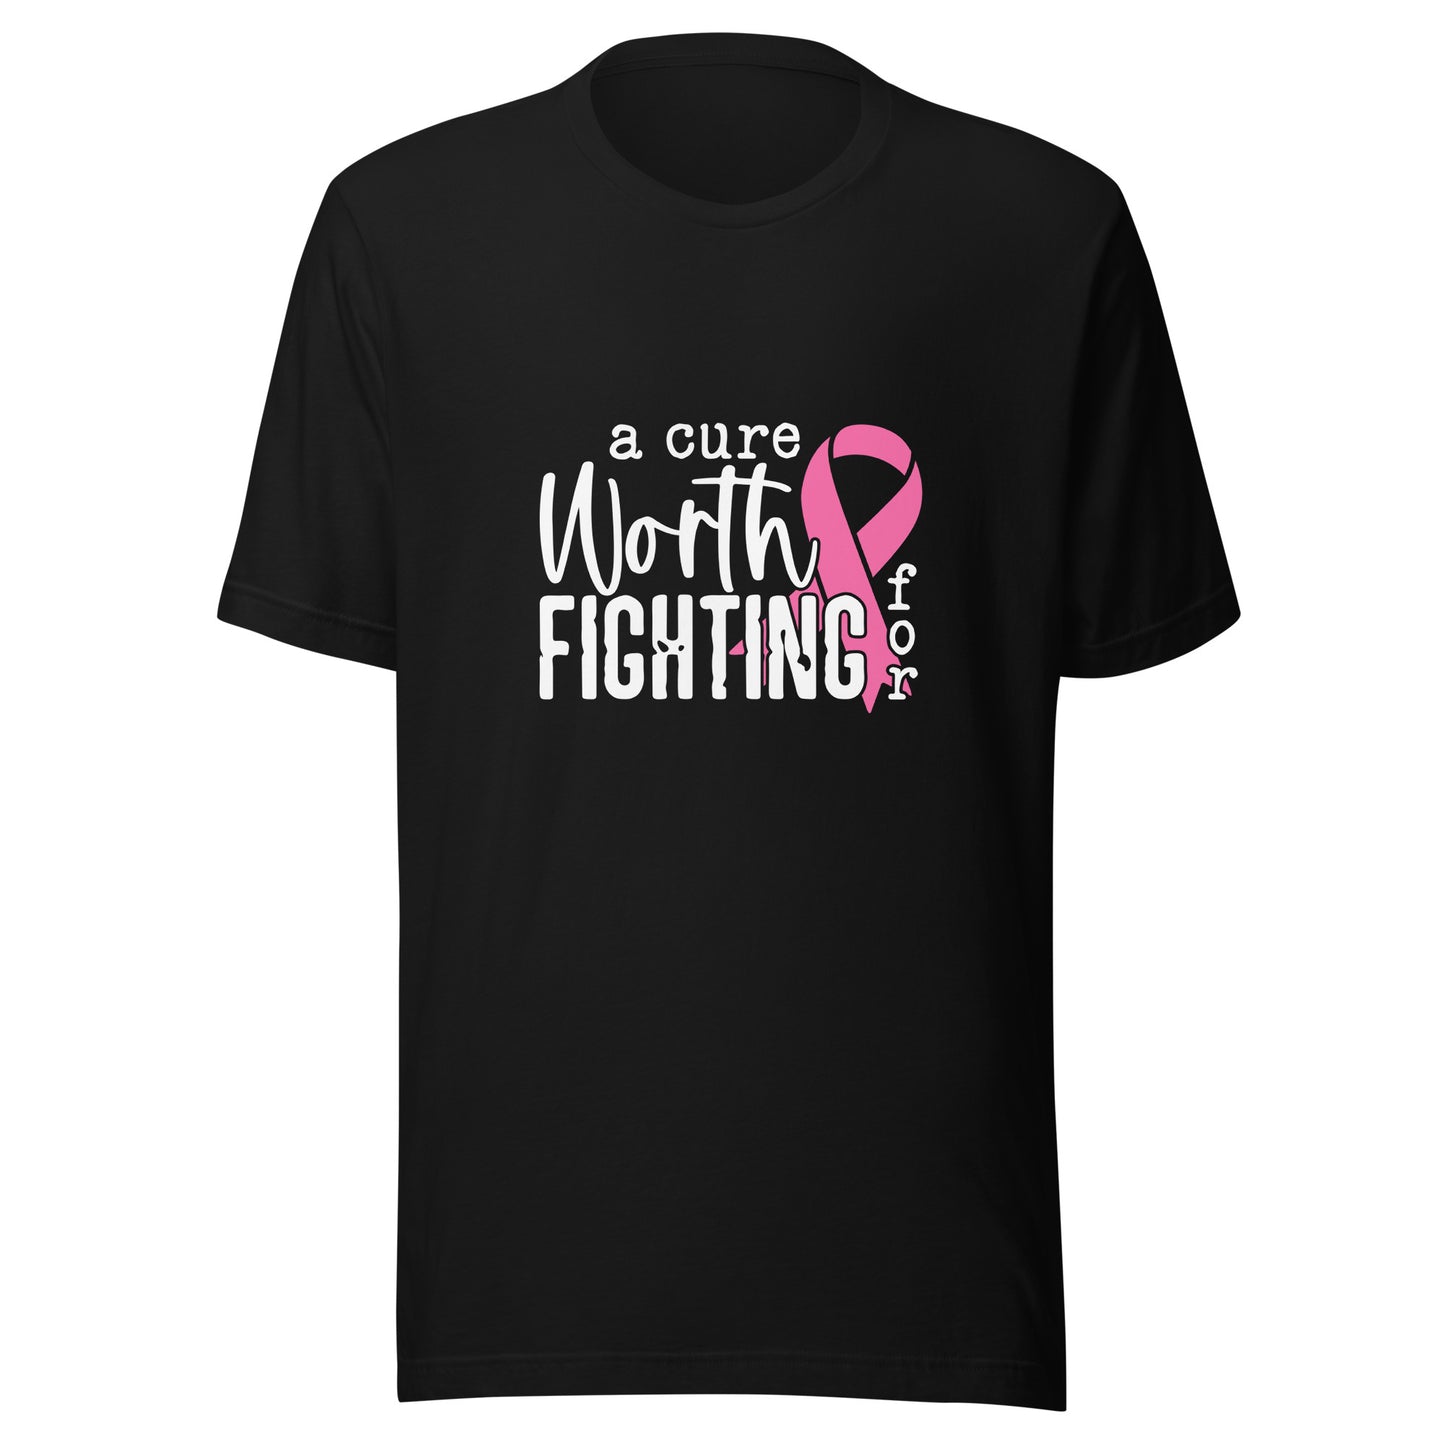 A Cure Worth Fighting For with Pink Ribbon - Breast Cancer Awareness Unisex T-shirt